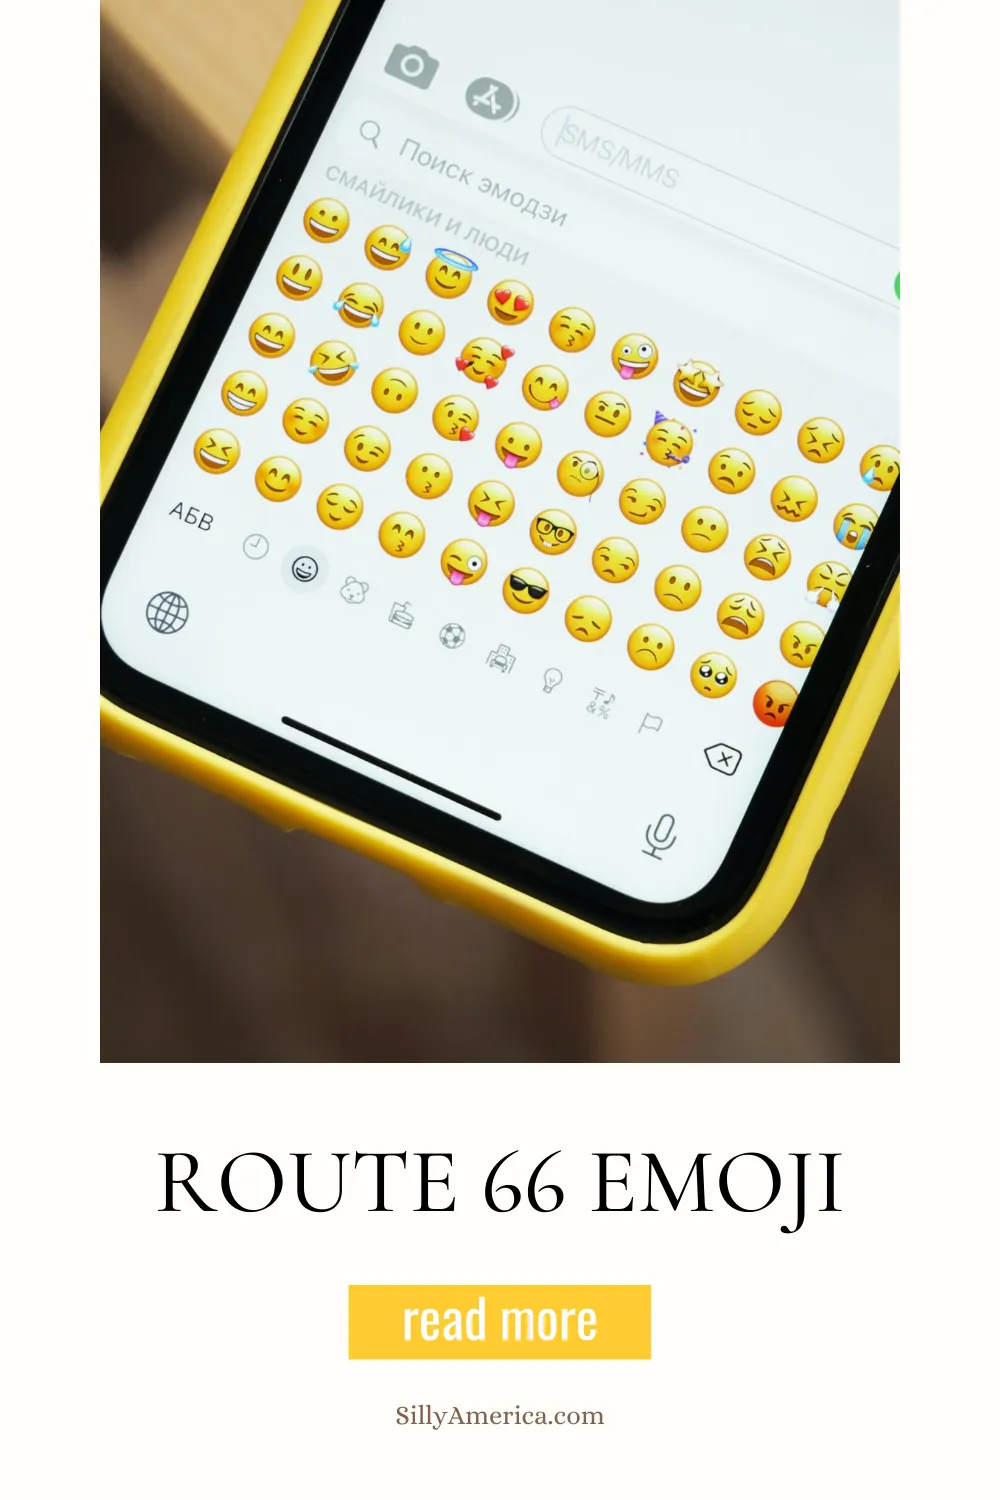 When taking any big road trip you're going to be looking for the perfect emoji to spice up your social media captions about your trip. So if you're driving the Mother Road you're probably looking for the best Route 66 emoji to use to represent your trip on Instagram or on Twitter or in texts. Here are some of the best Route 66 emoji you can use for your road trip.  #Emoji #Route66 #Route66Emoji #Route66RoadTrip #RoadTrip #RoadTripPlanning